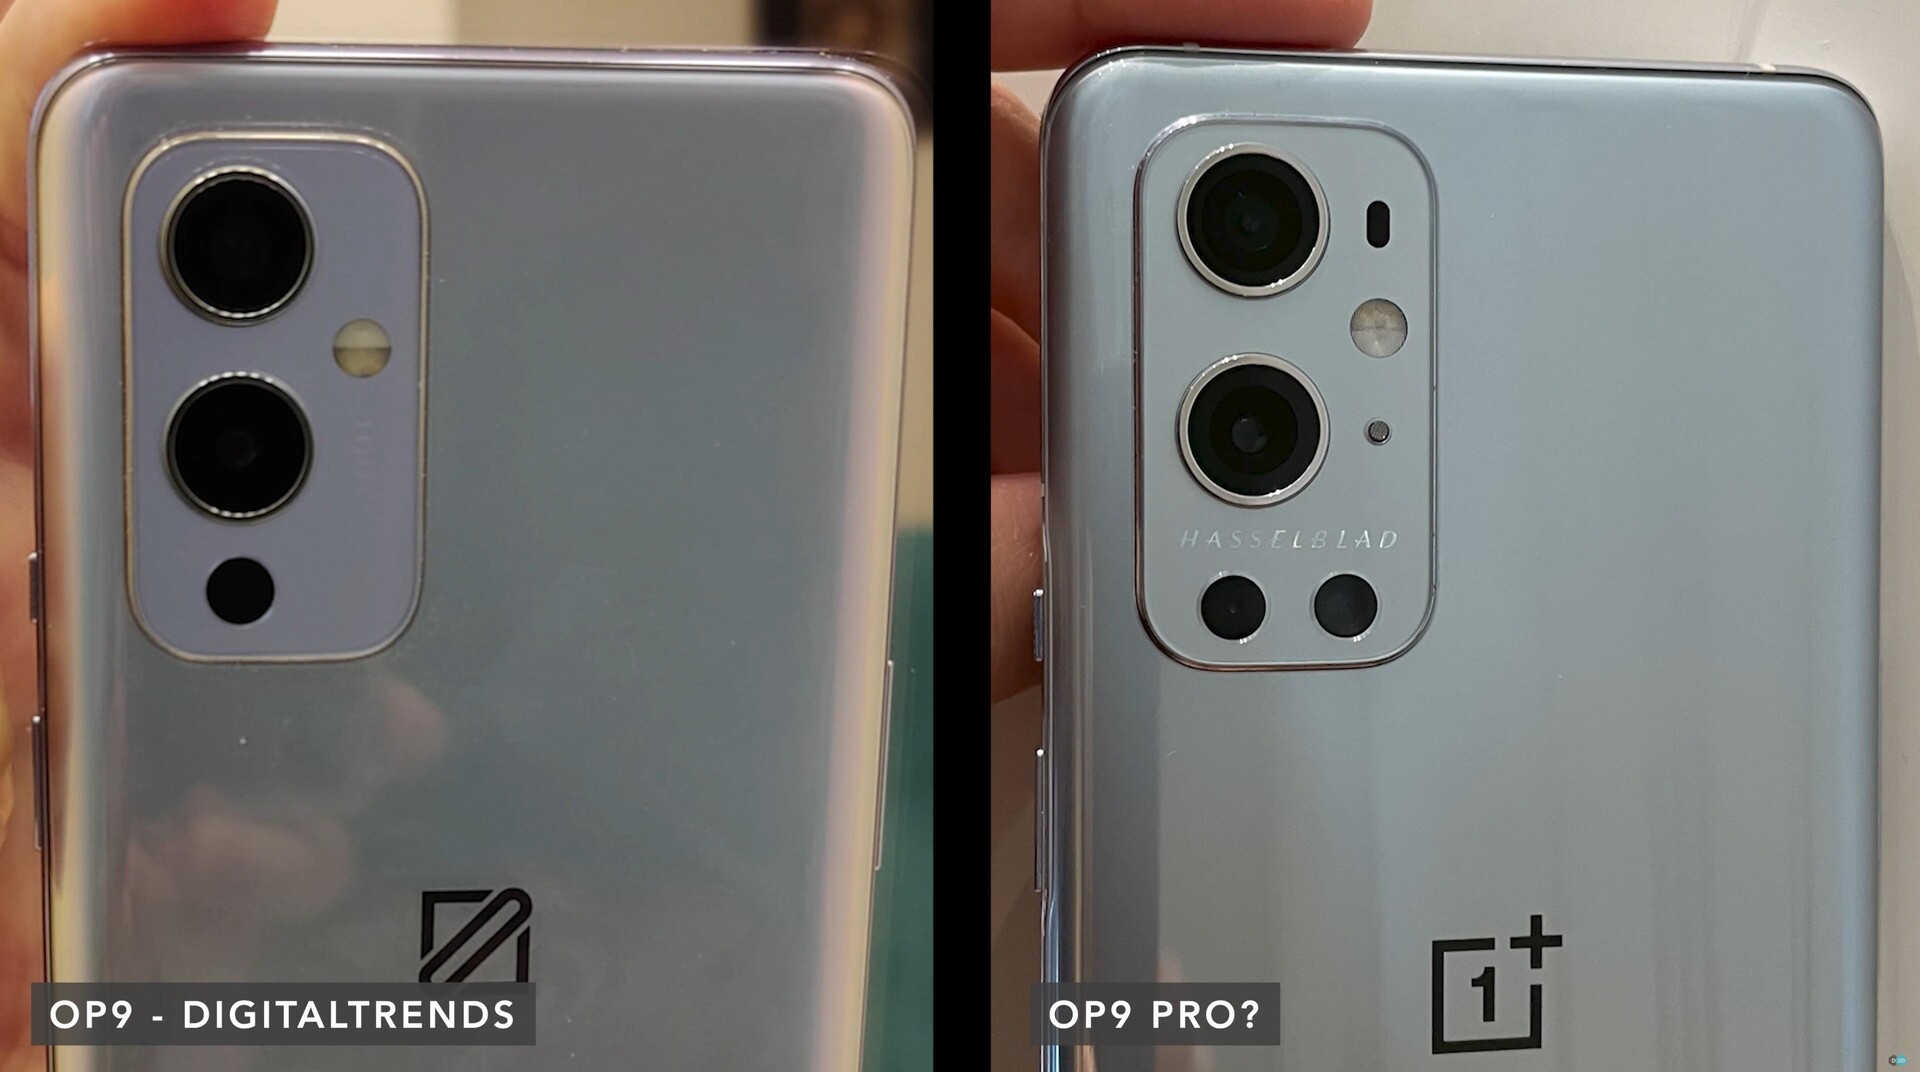 The OnePlus 9 Pro leaks again in live photos;  Hasselblad partnership and extensive camera hardware confirmed, as well as a 120 Hz screen and QHD +